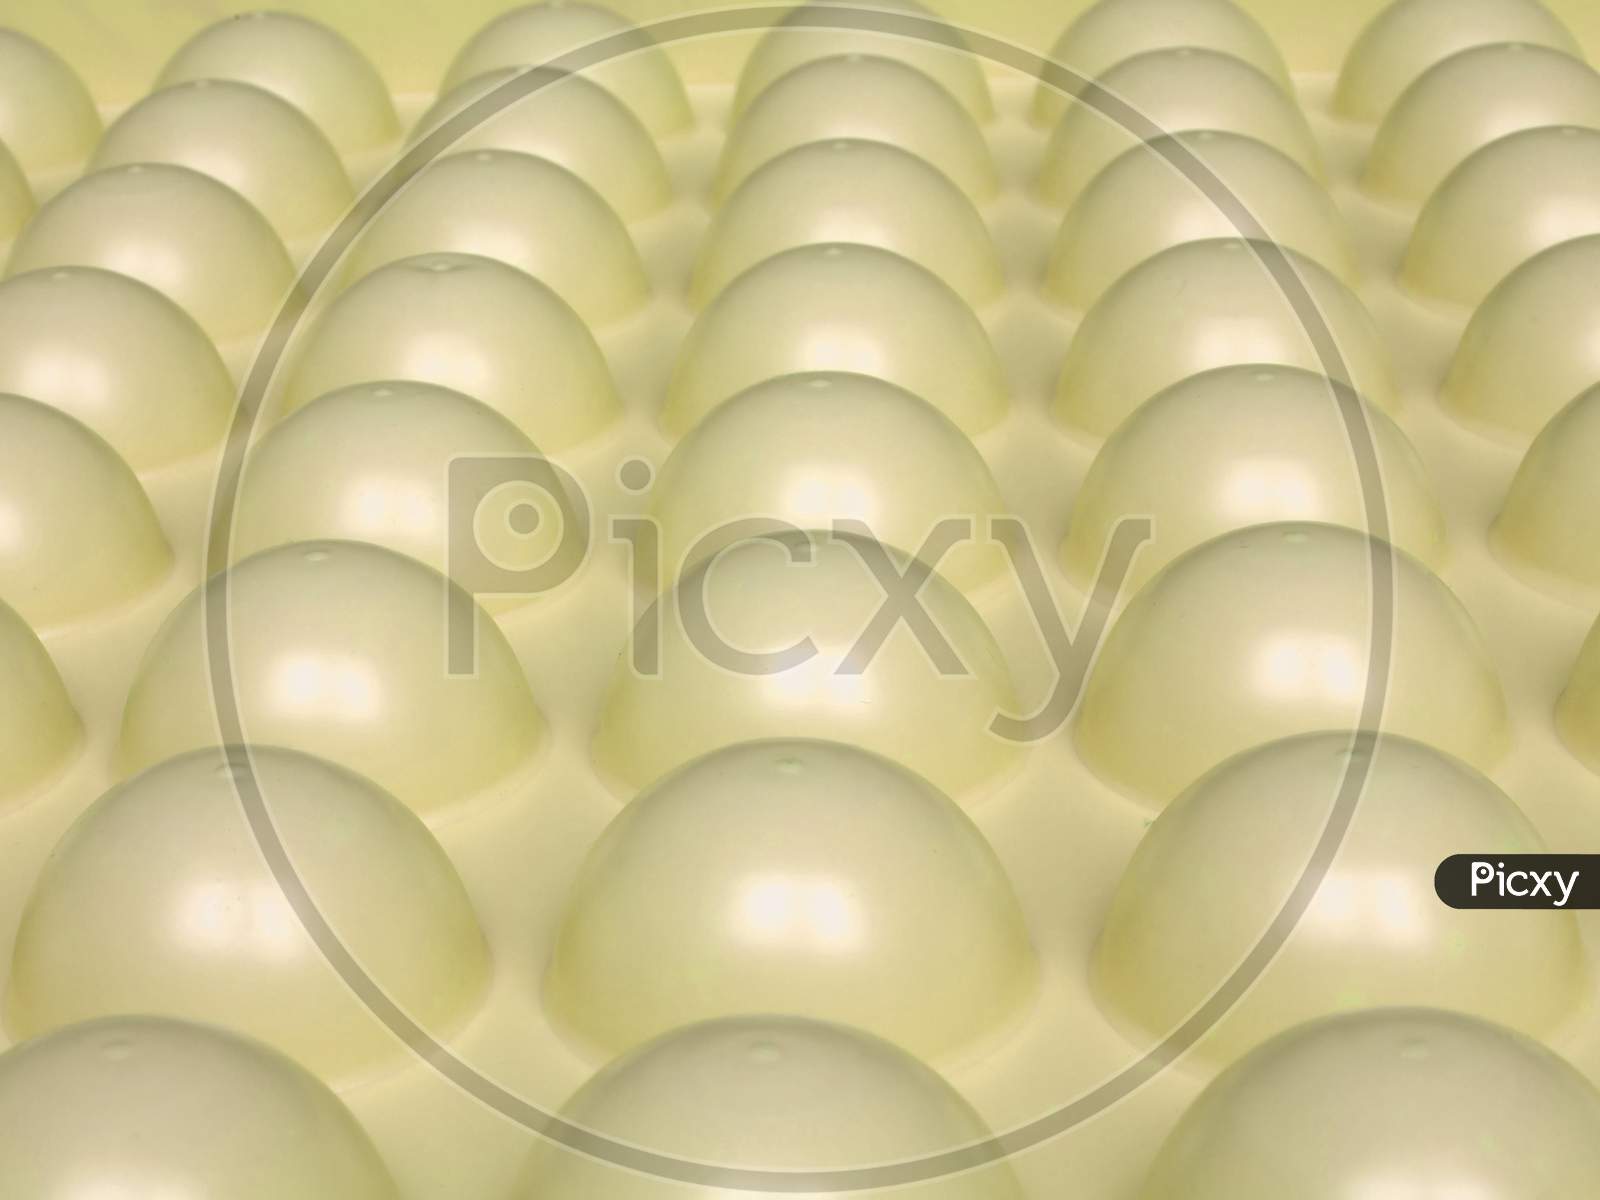 Abstract Bubbles Background